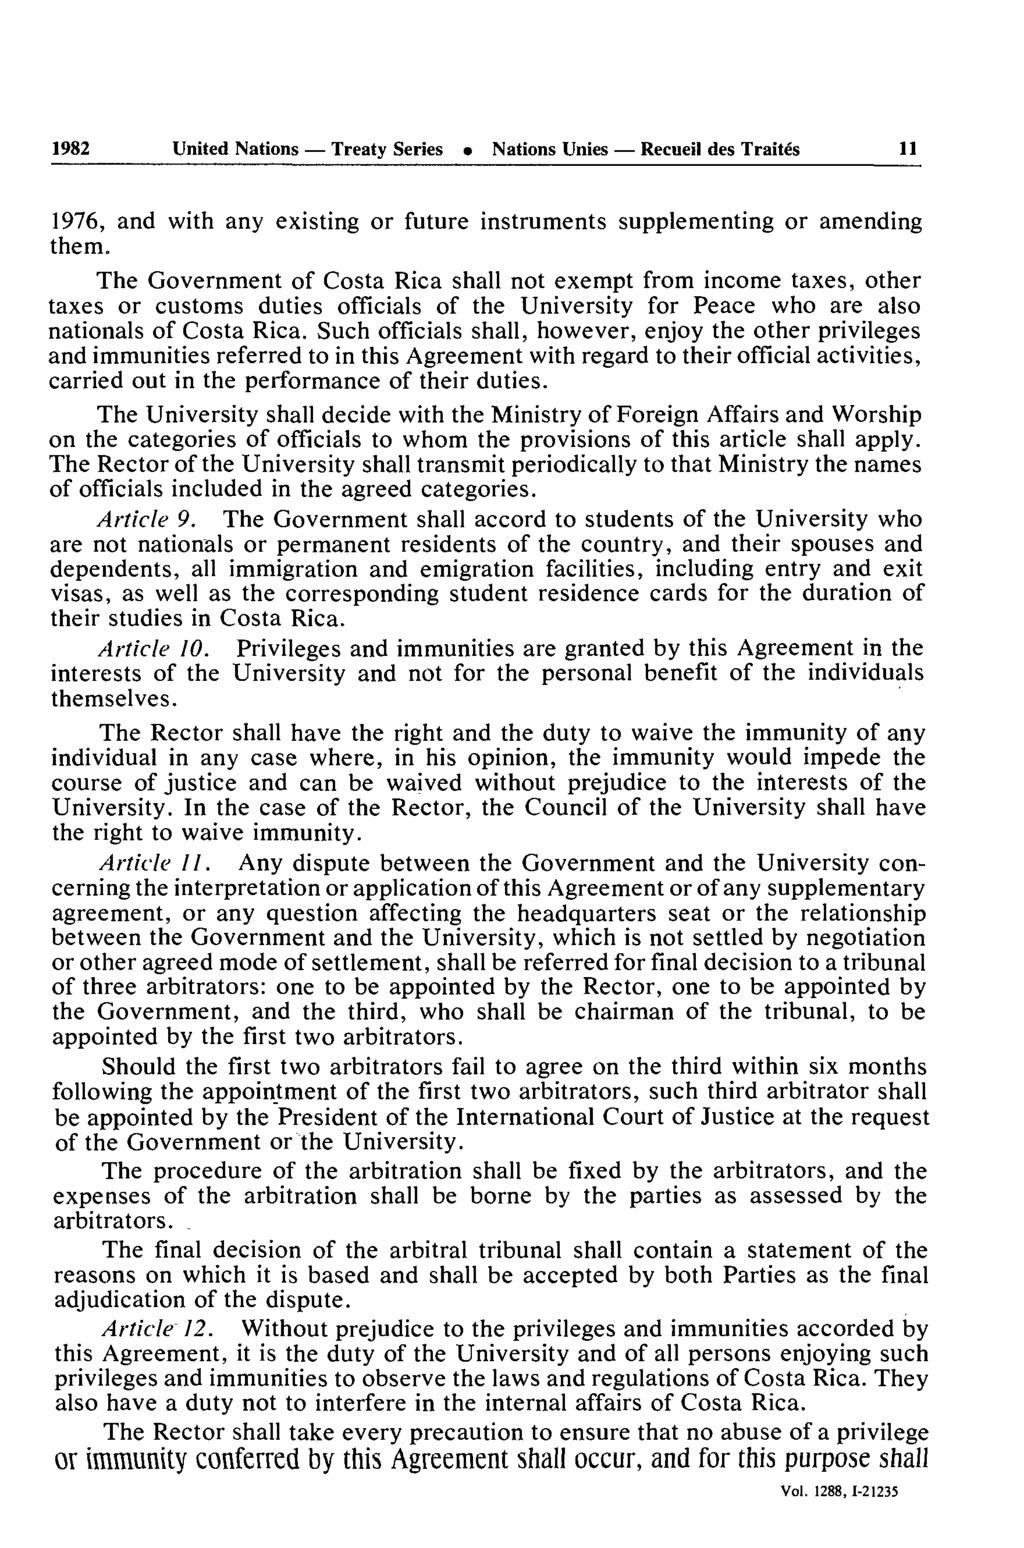 1982 United Nations Treaty Series Nations Unies Recueil des Traités 11 1976, and with any existing or future instruments supplementing or amending them.